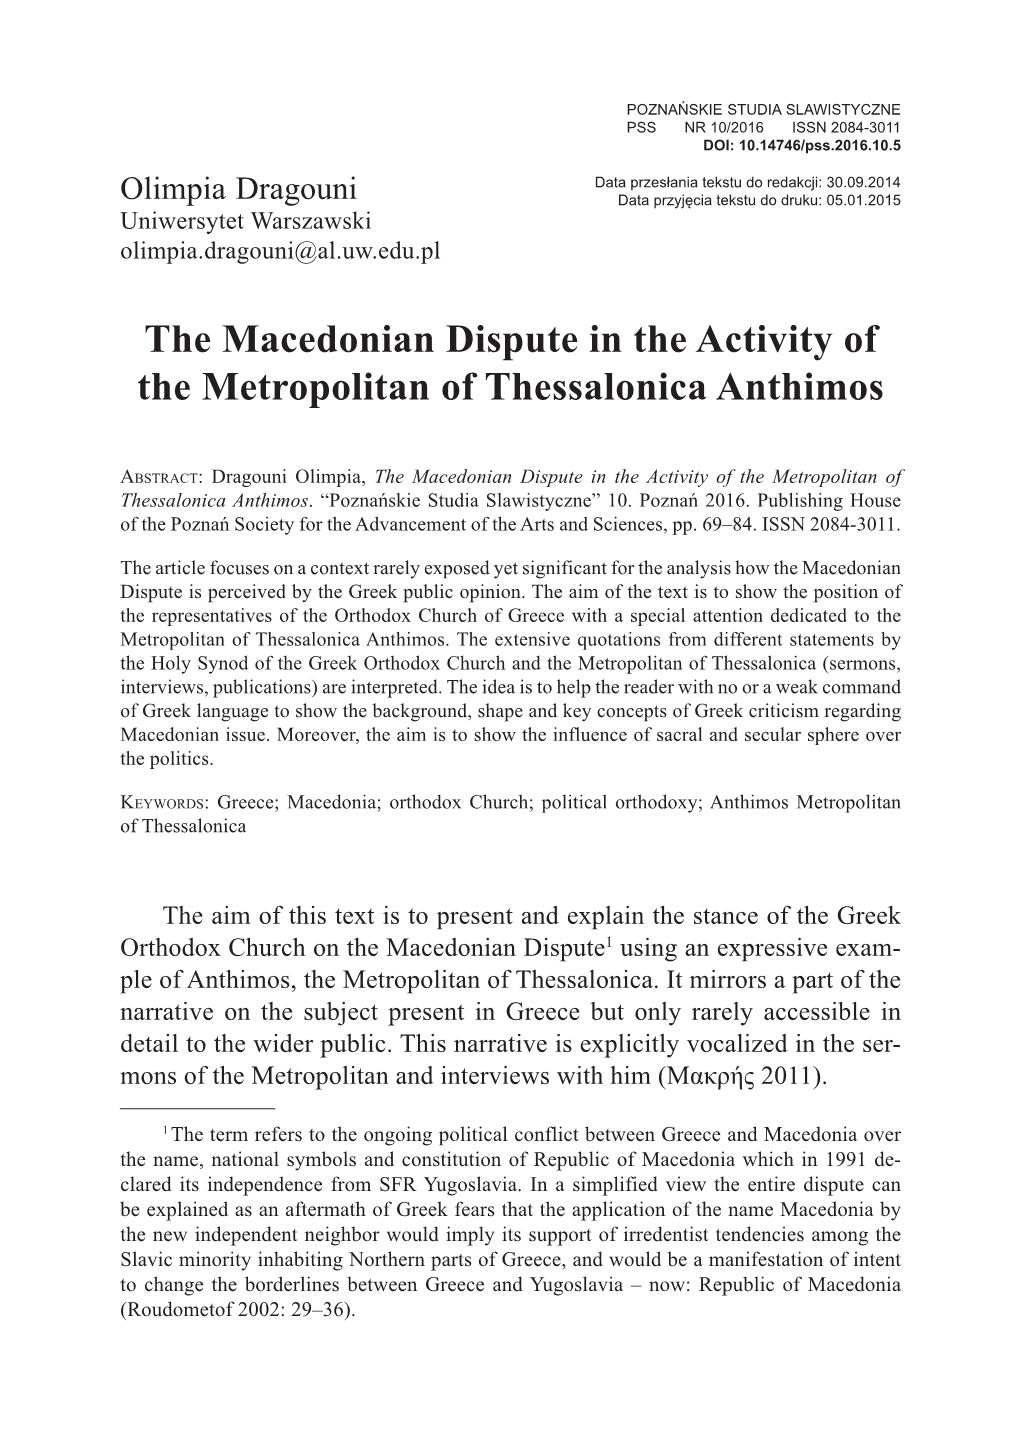 The Macedonian Dispute in the Activity of the Metropolitan of Thessalonica Anthimos